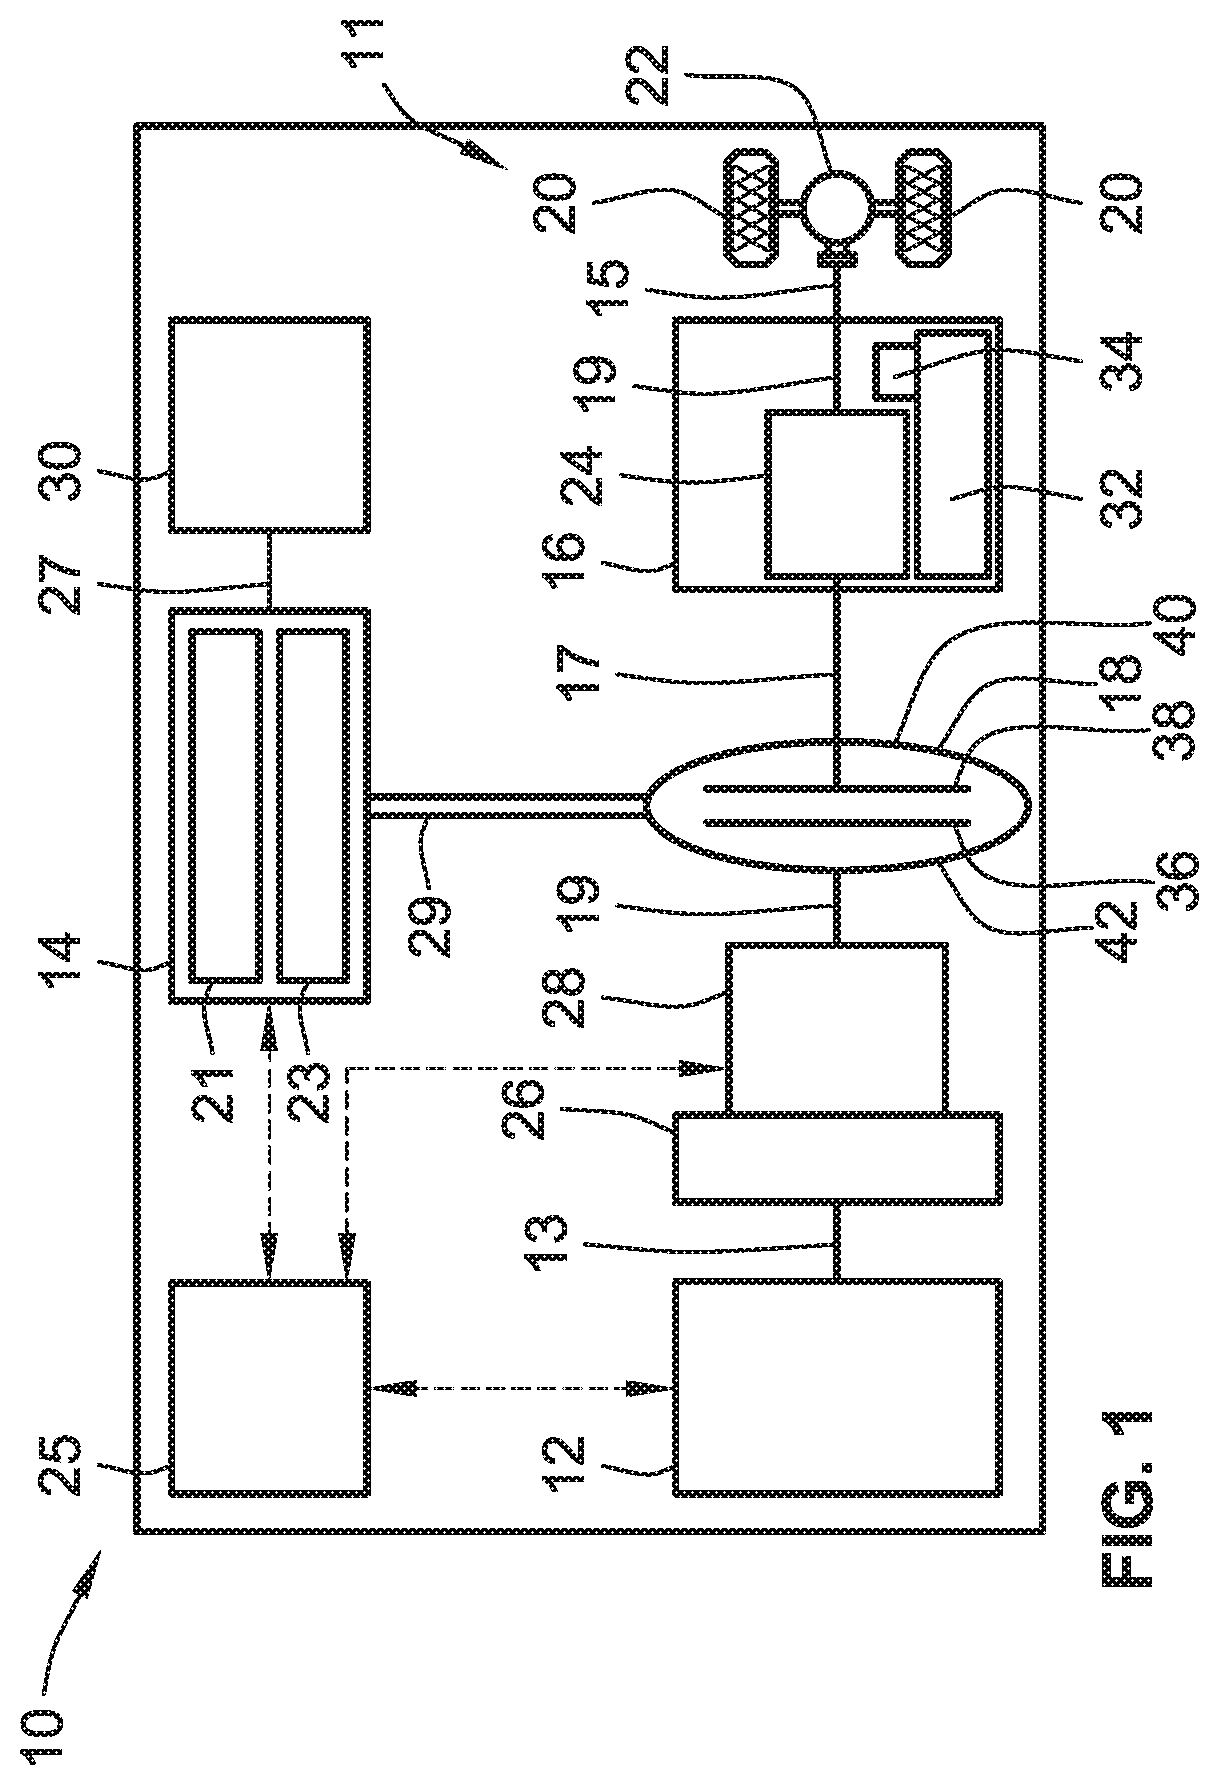 Electric machines with features for enhancing load transfer performance of stacked-laminate rotors